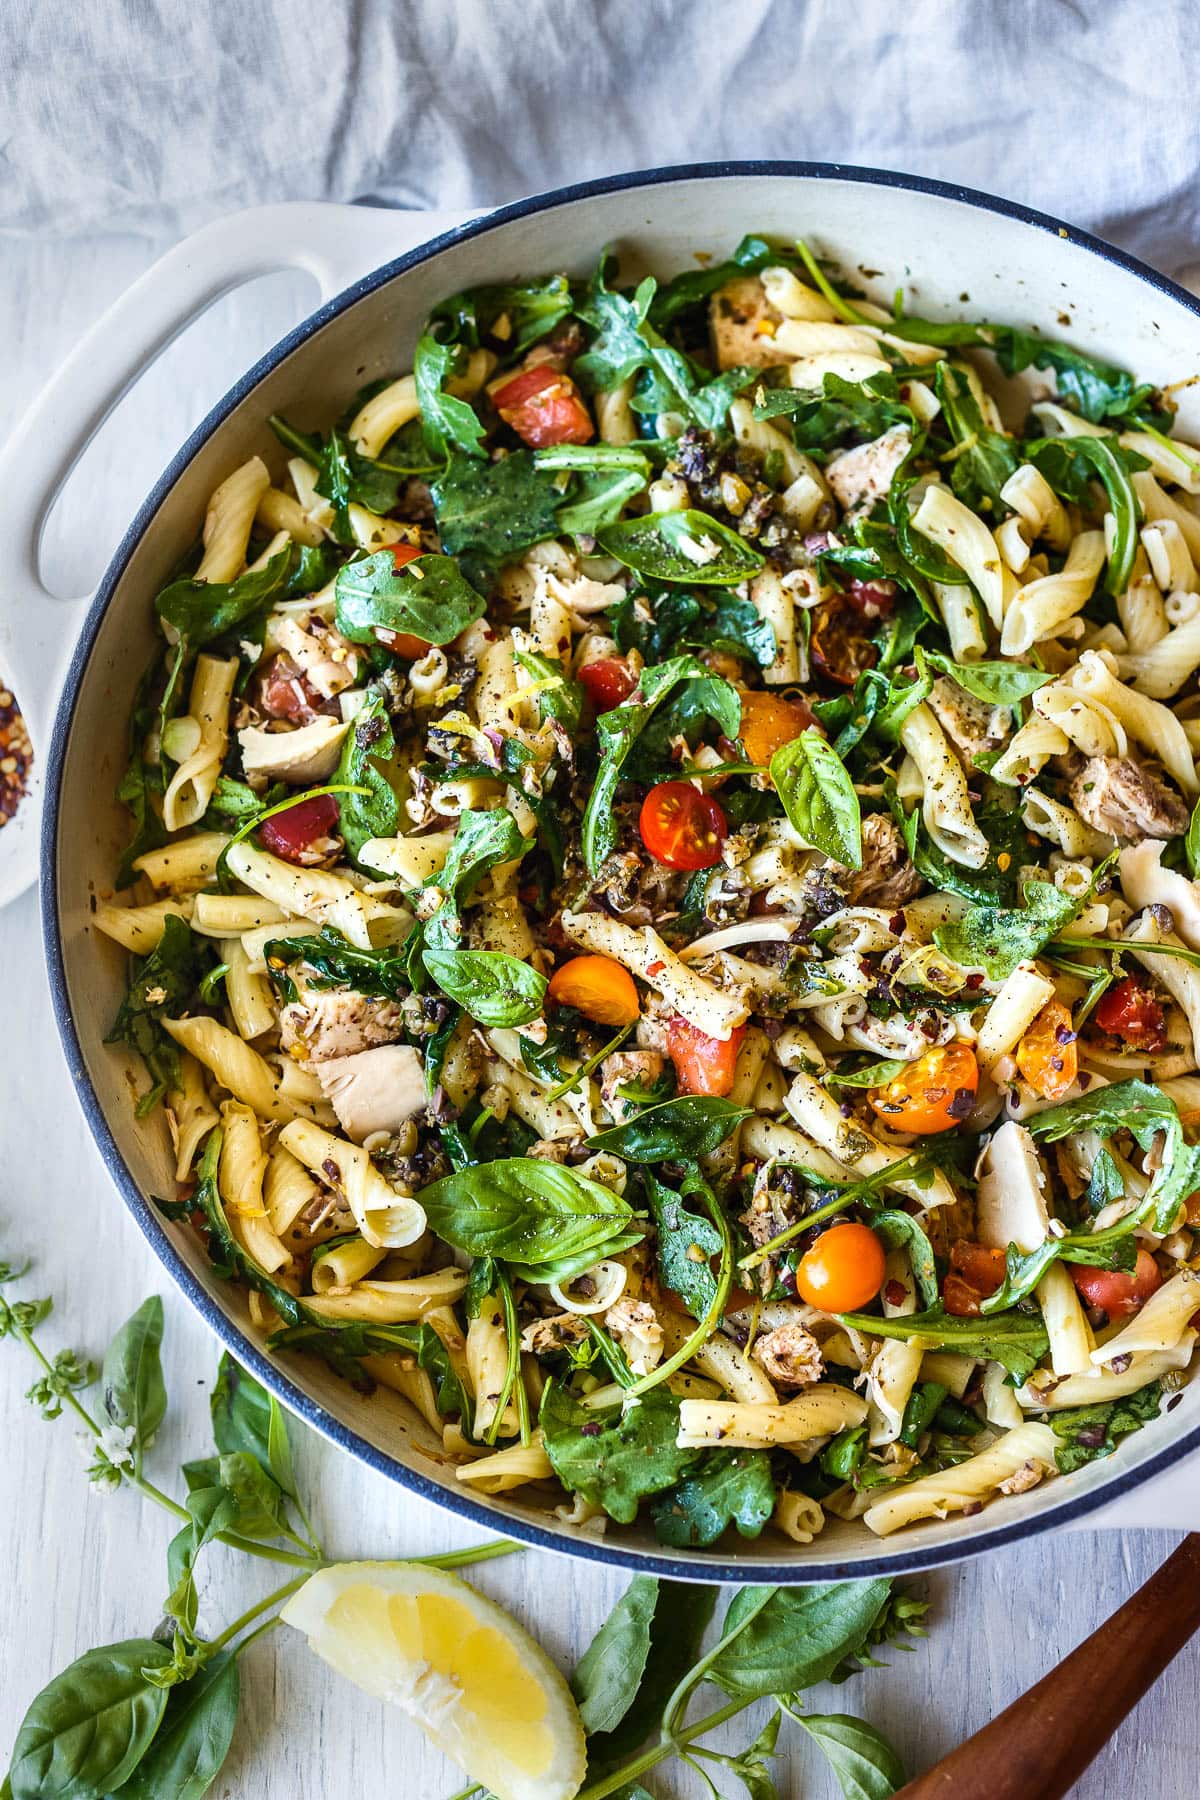 Tuna Pasta with Olive Tapenade & Fresh Tomatoes is a super fast, fresh pasta dish that is full of bright clean and savory flavors.  An easy meal ready in 30 minutes!  Healthy, quick and delicious!